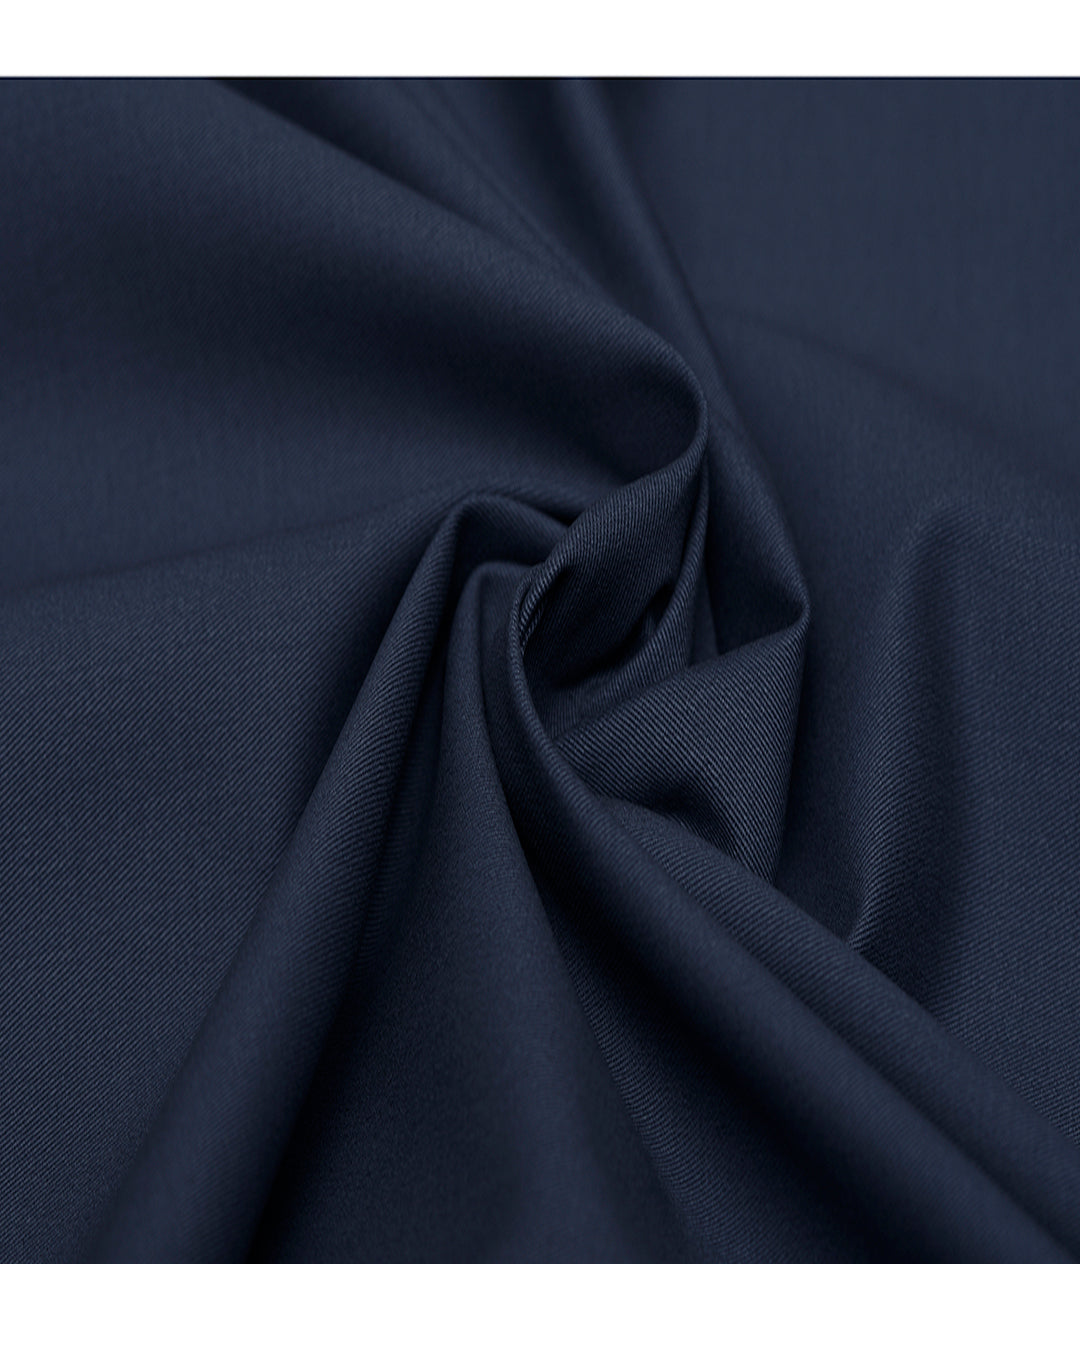 Closeup view of custom Genoa Chino pants for men by Luxire in midnight blue